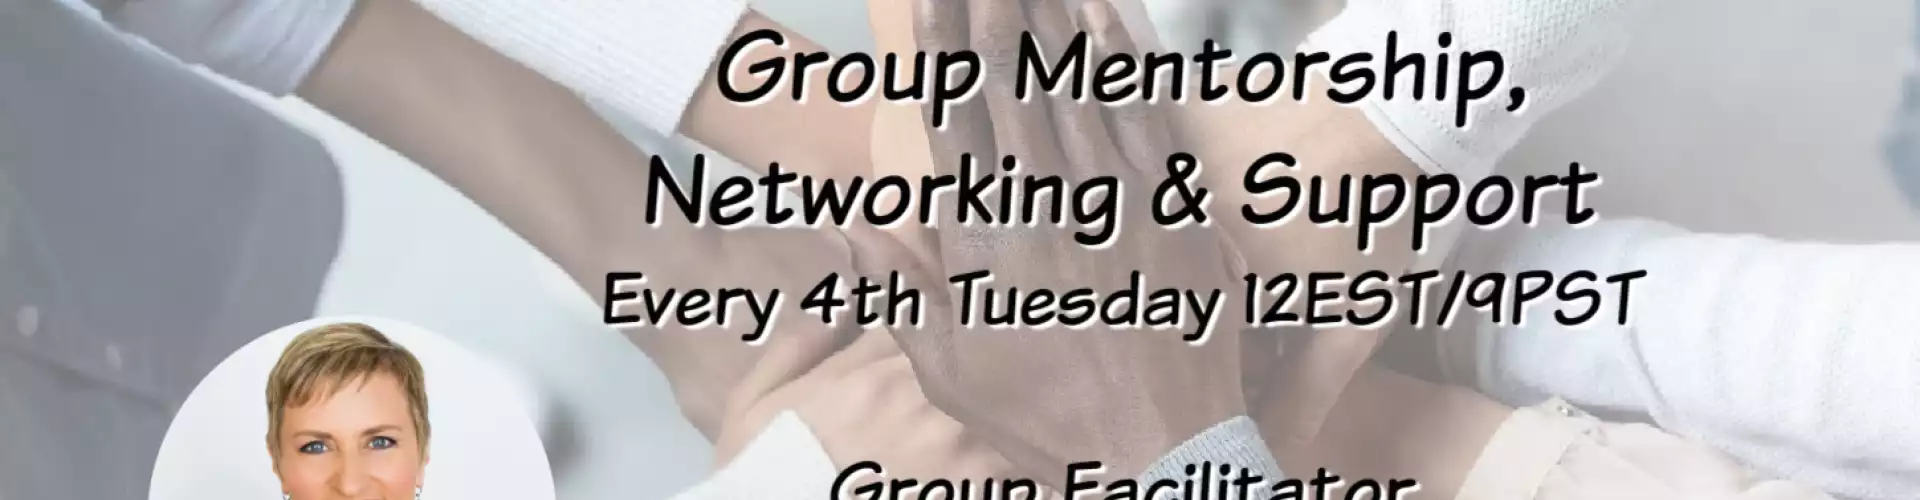 Group Mentorship, Networking & Support Feb 2021